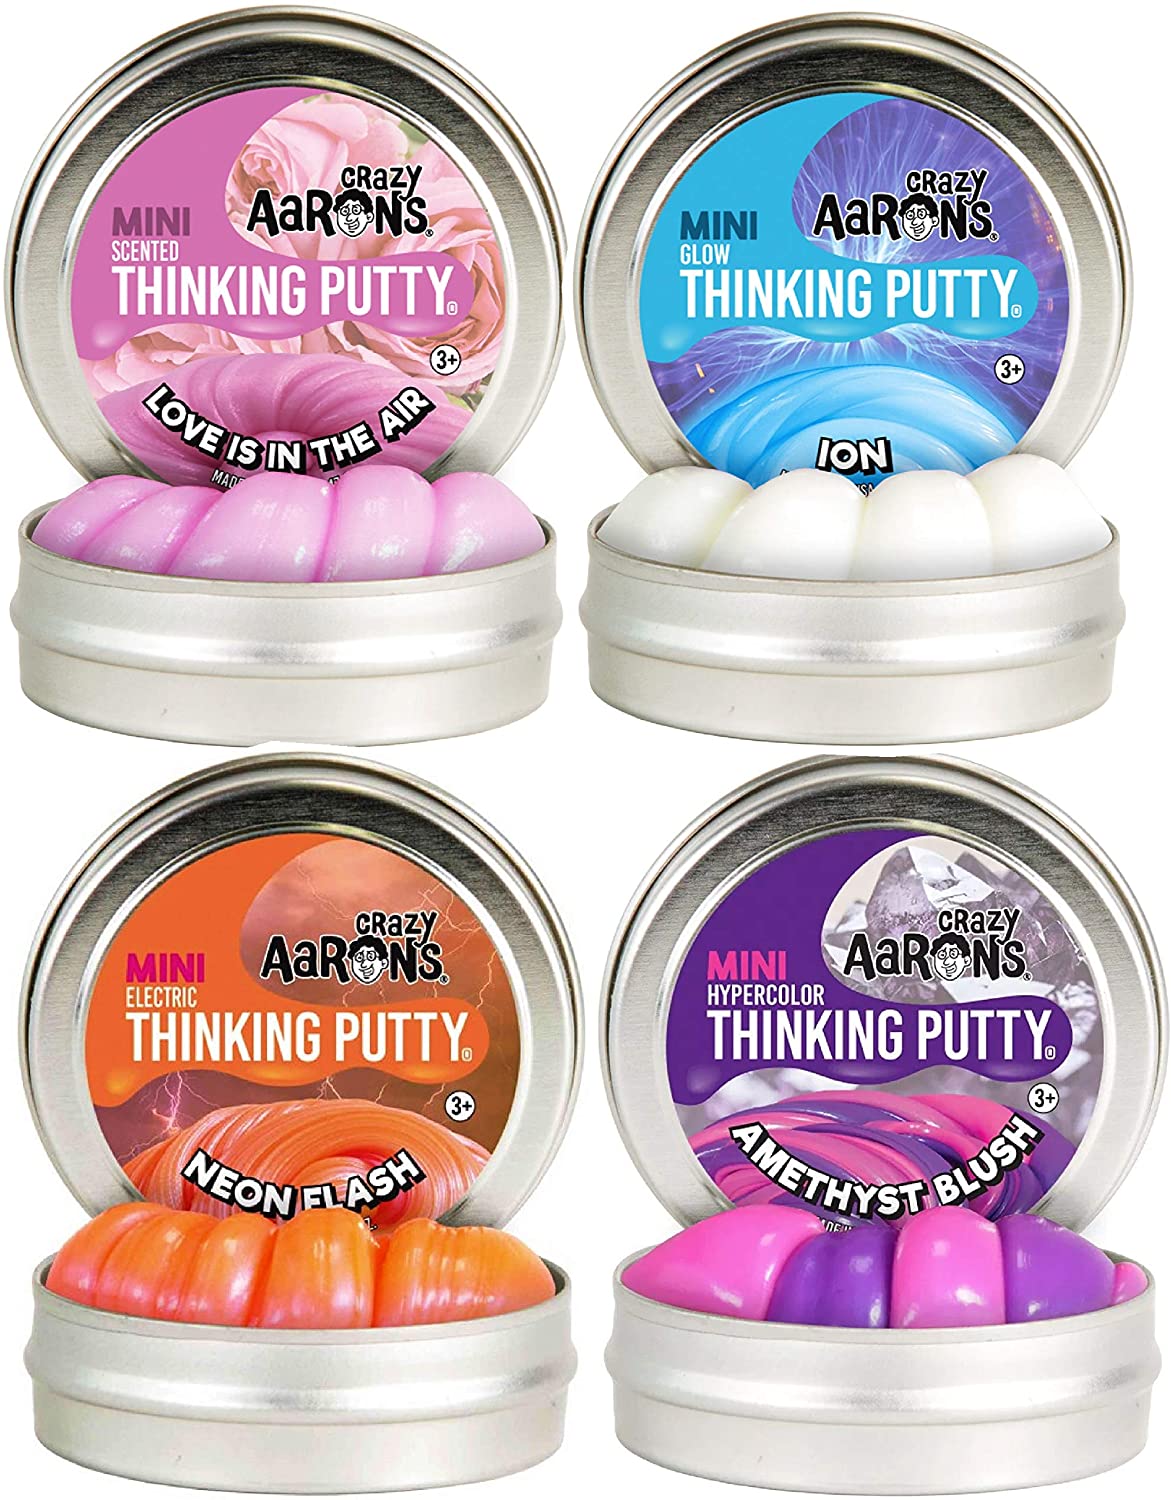 Best tween girl gifts: Crazy Aaron's mini tins of thinking putty